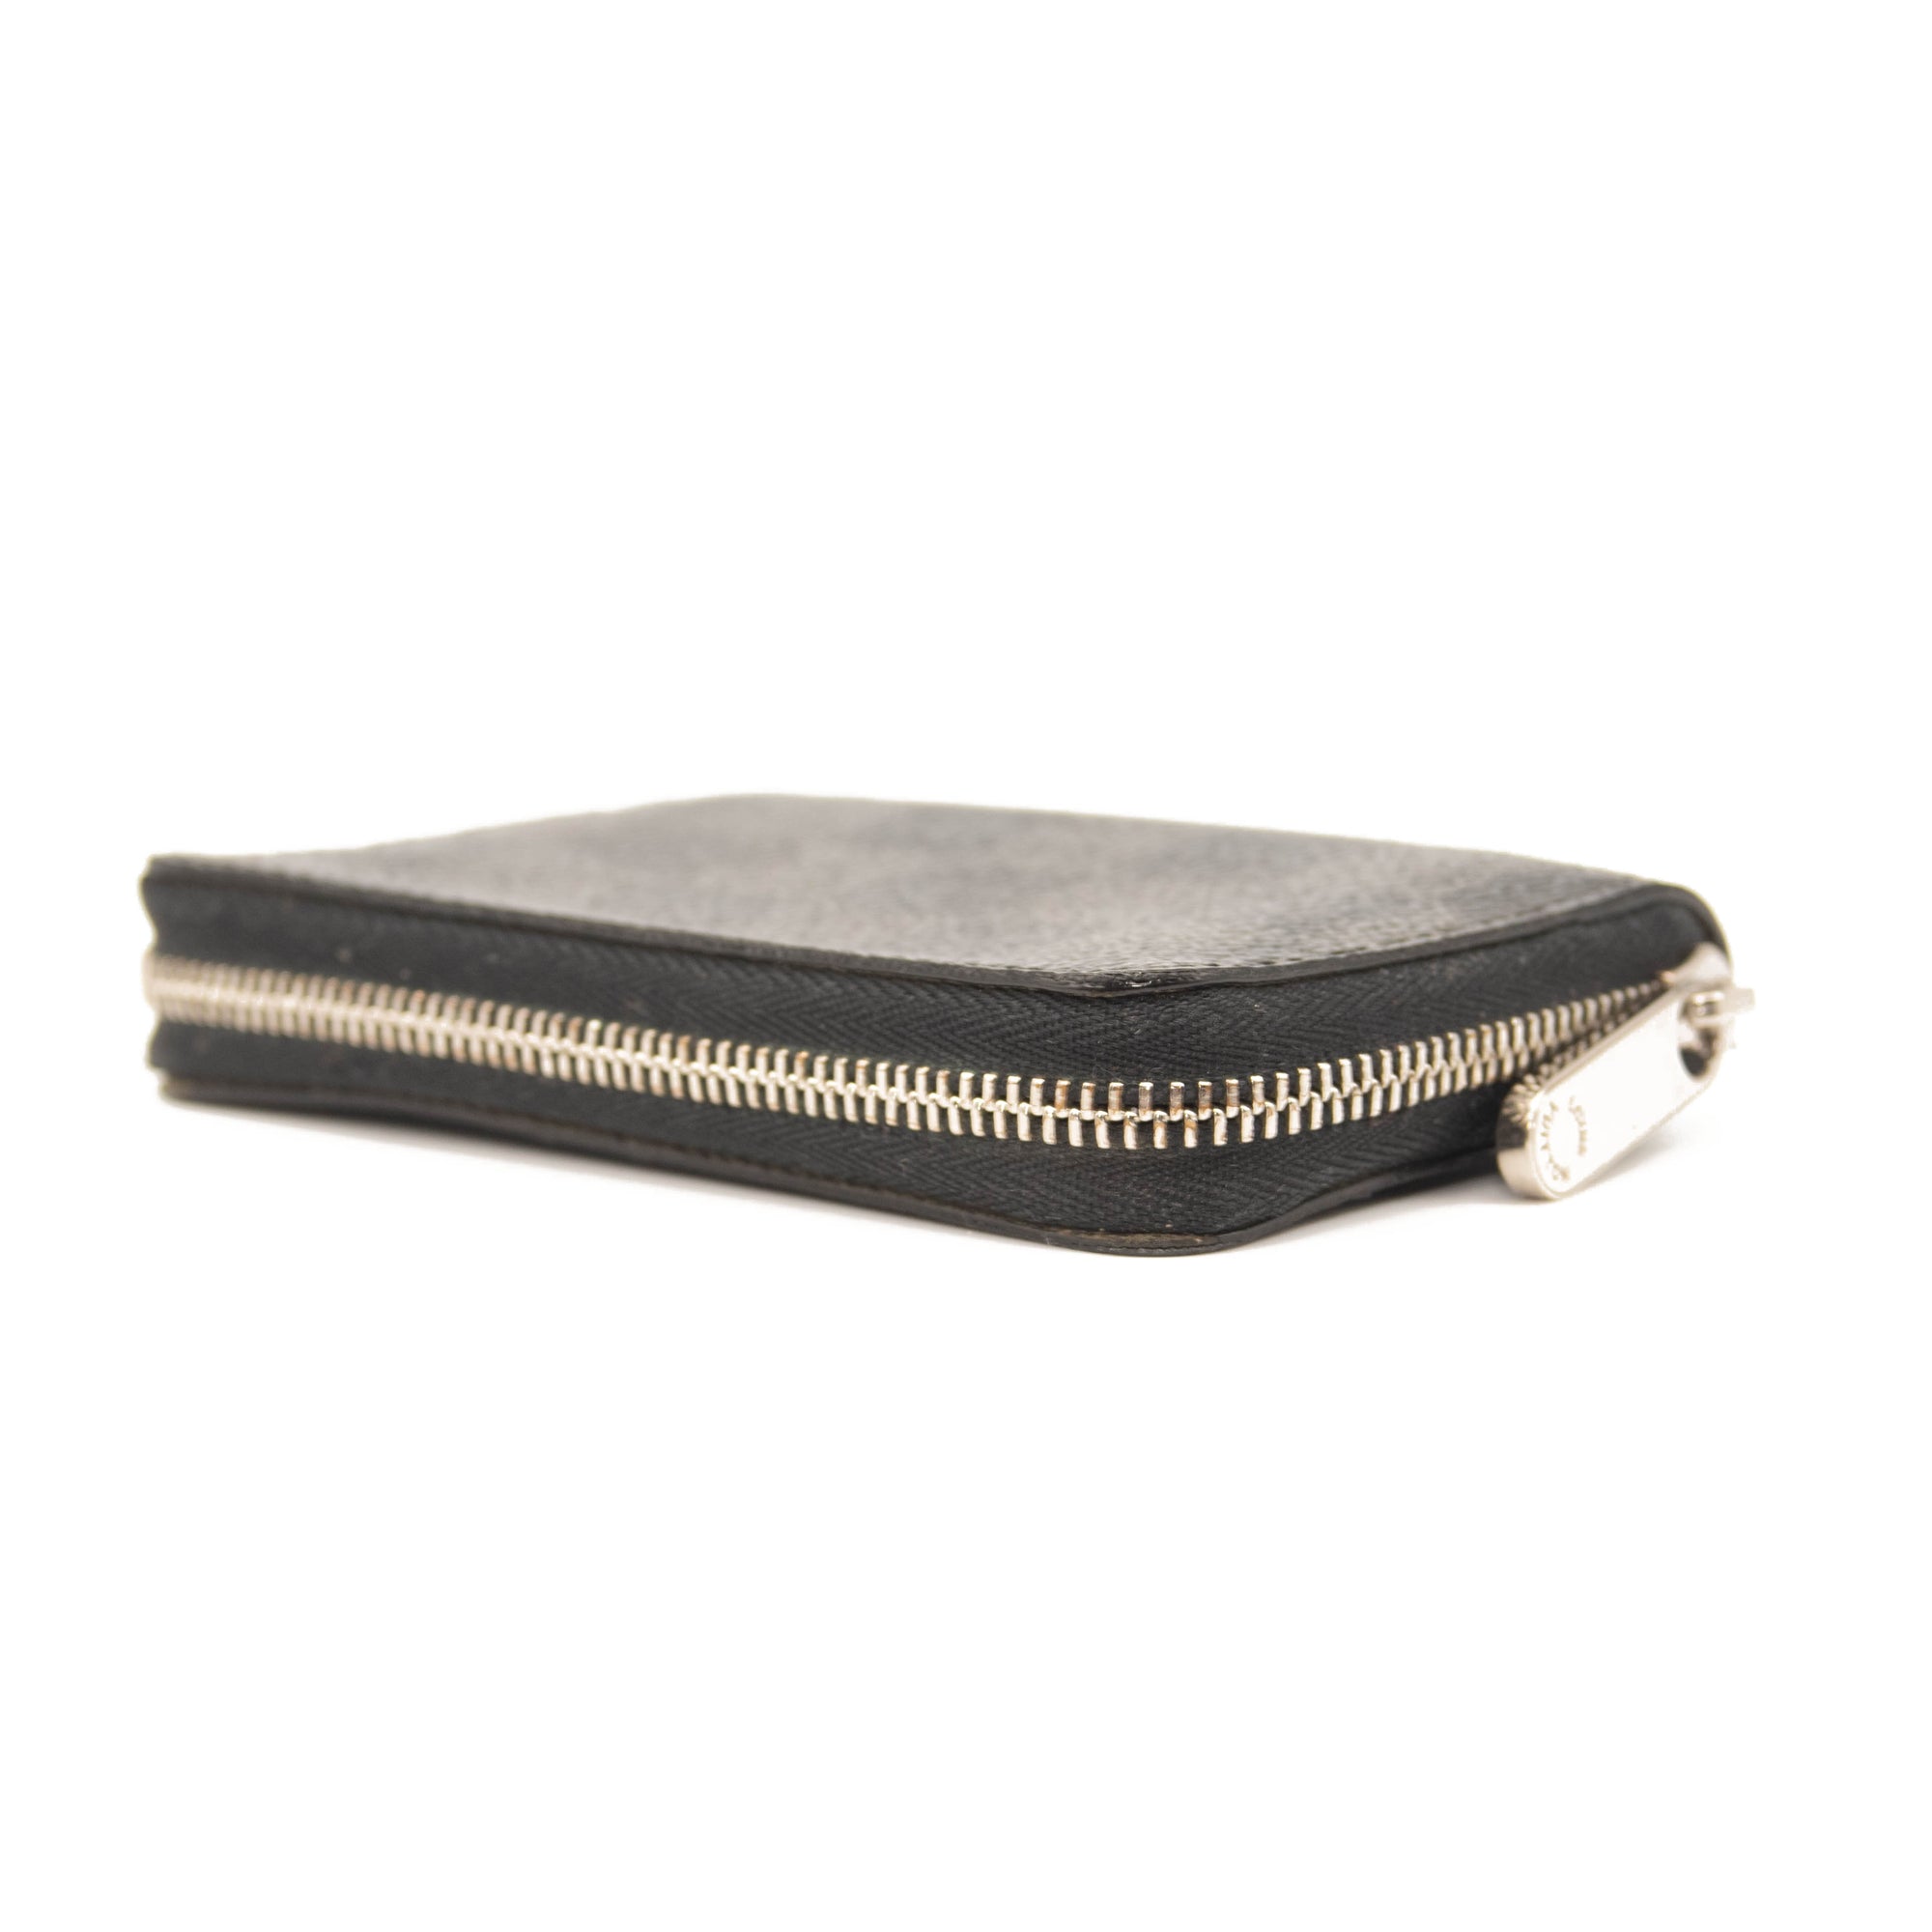 compact curieuse wallet